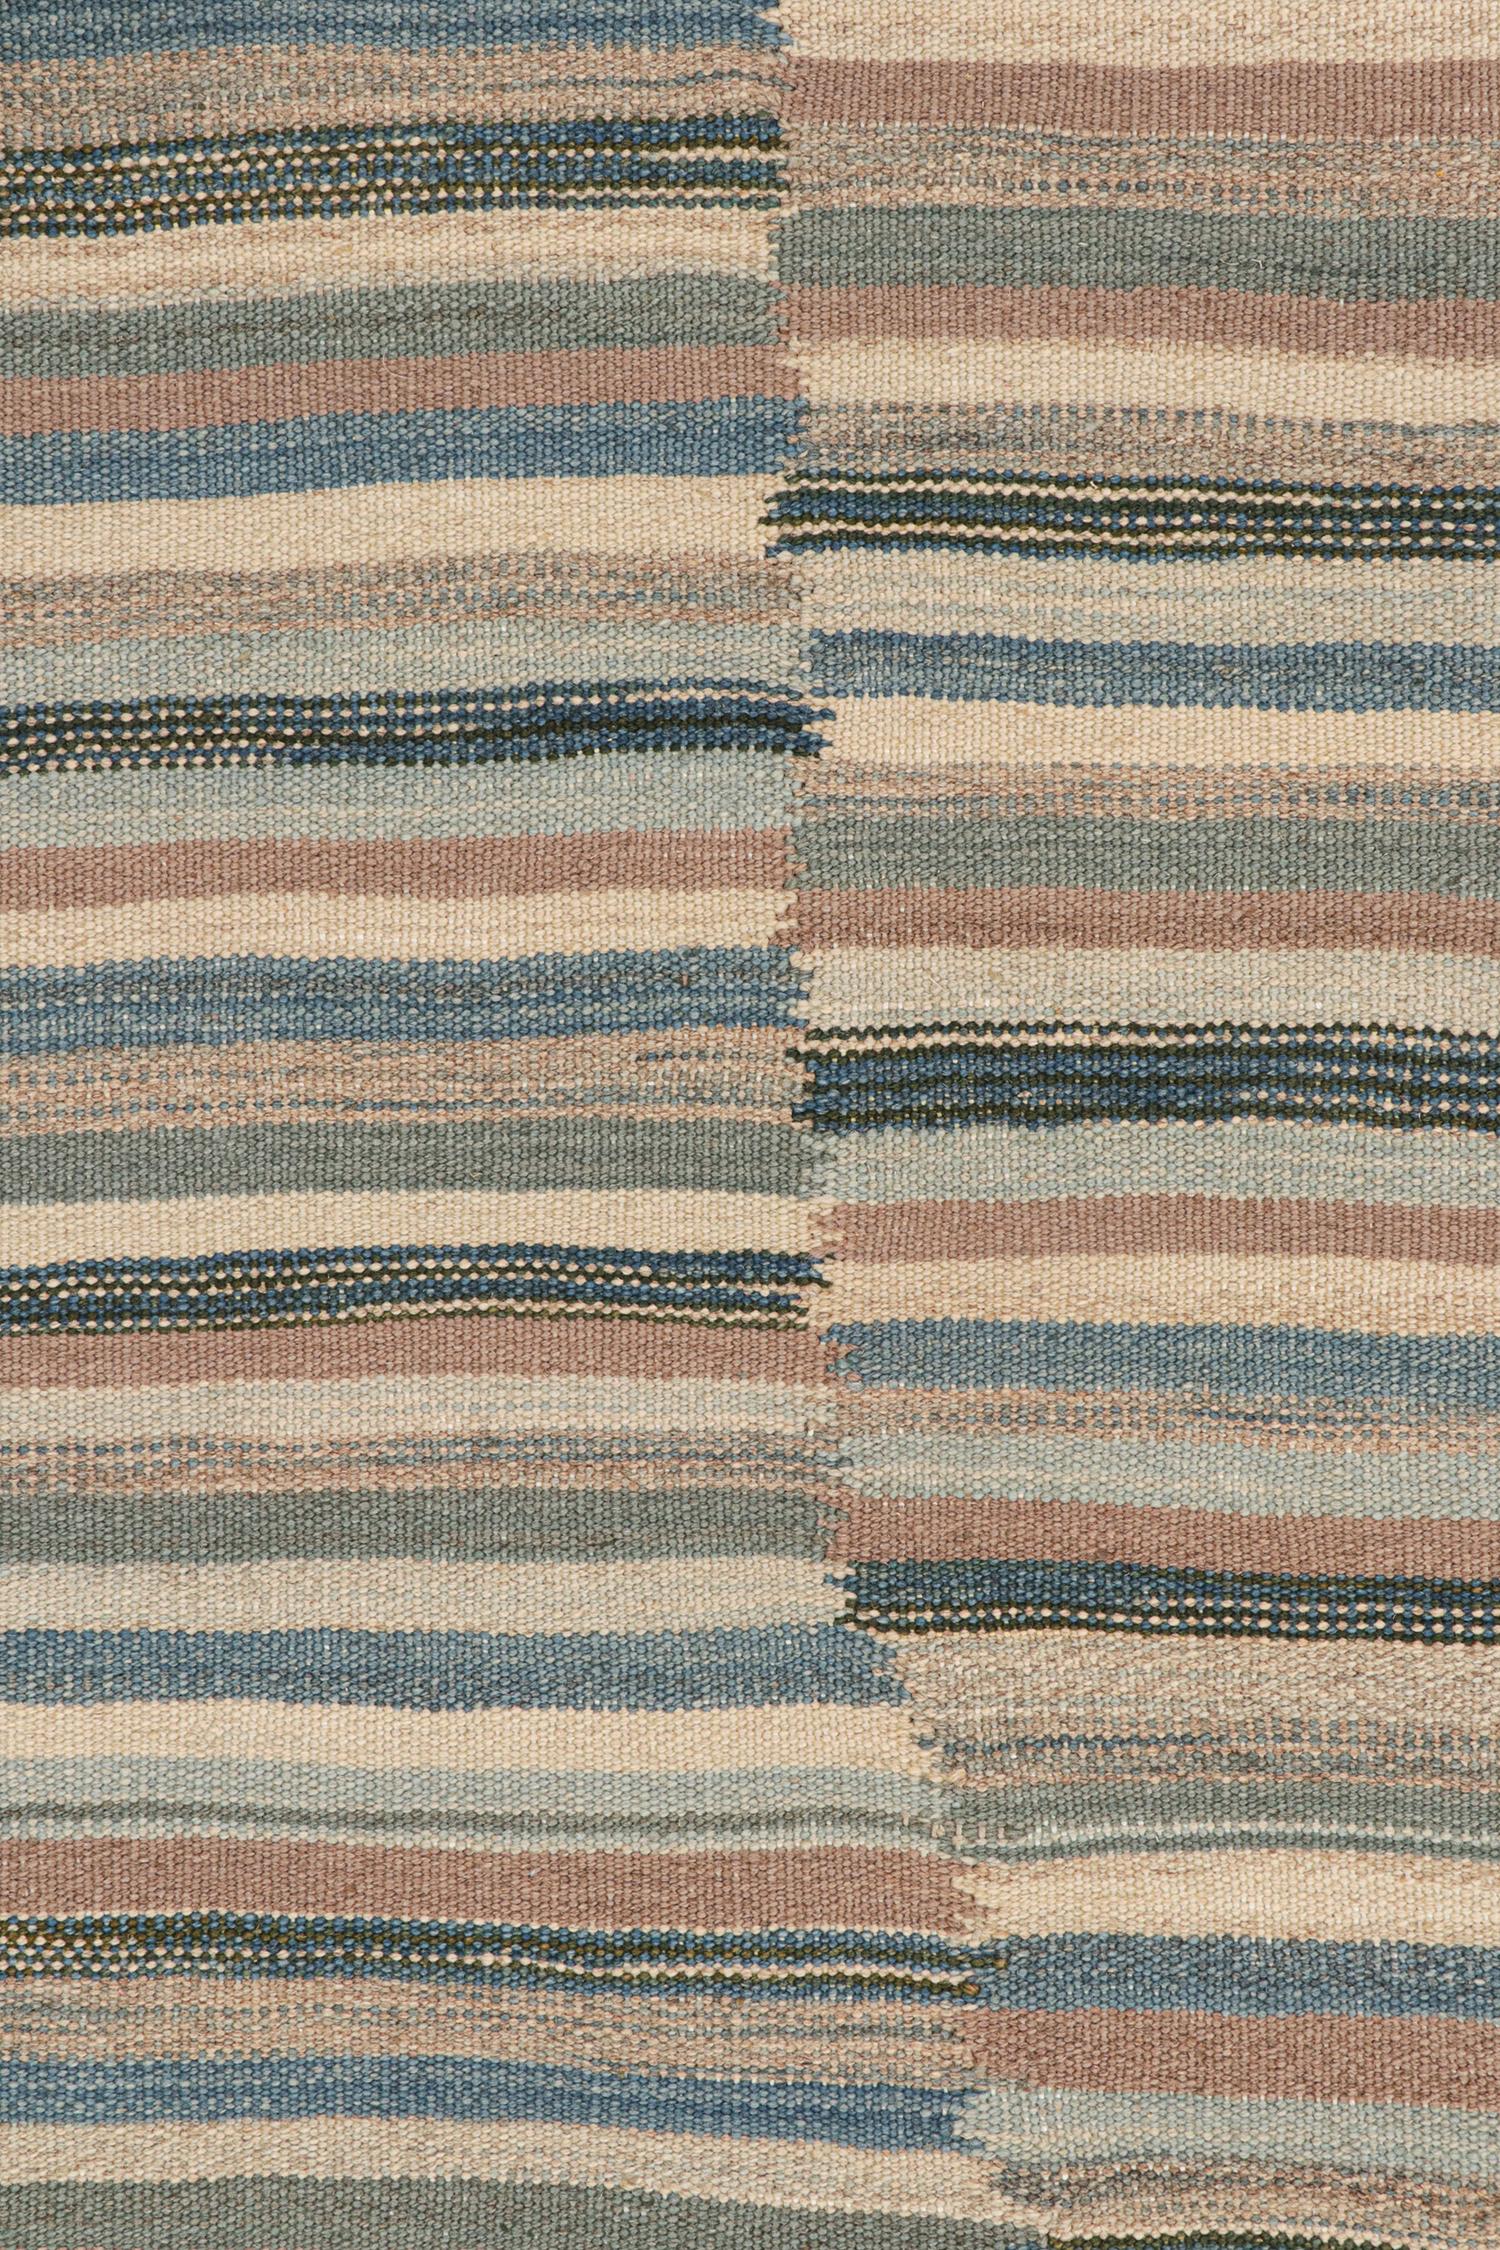 Vintage Persian Kilim with Panels in Beige-Brown and Blue Stripes by Rug & Kilim In Good Condition For Sale In Long Island City, NY